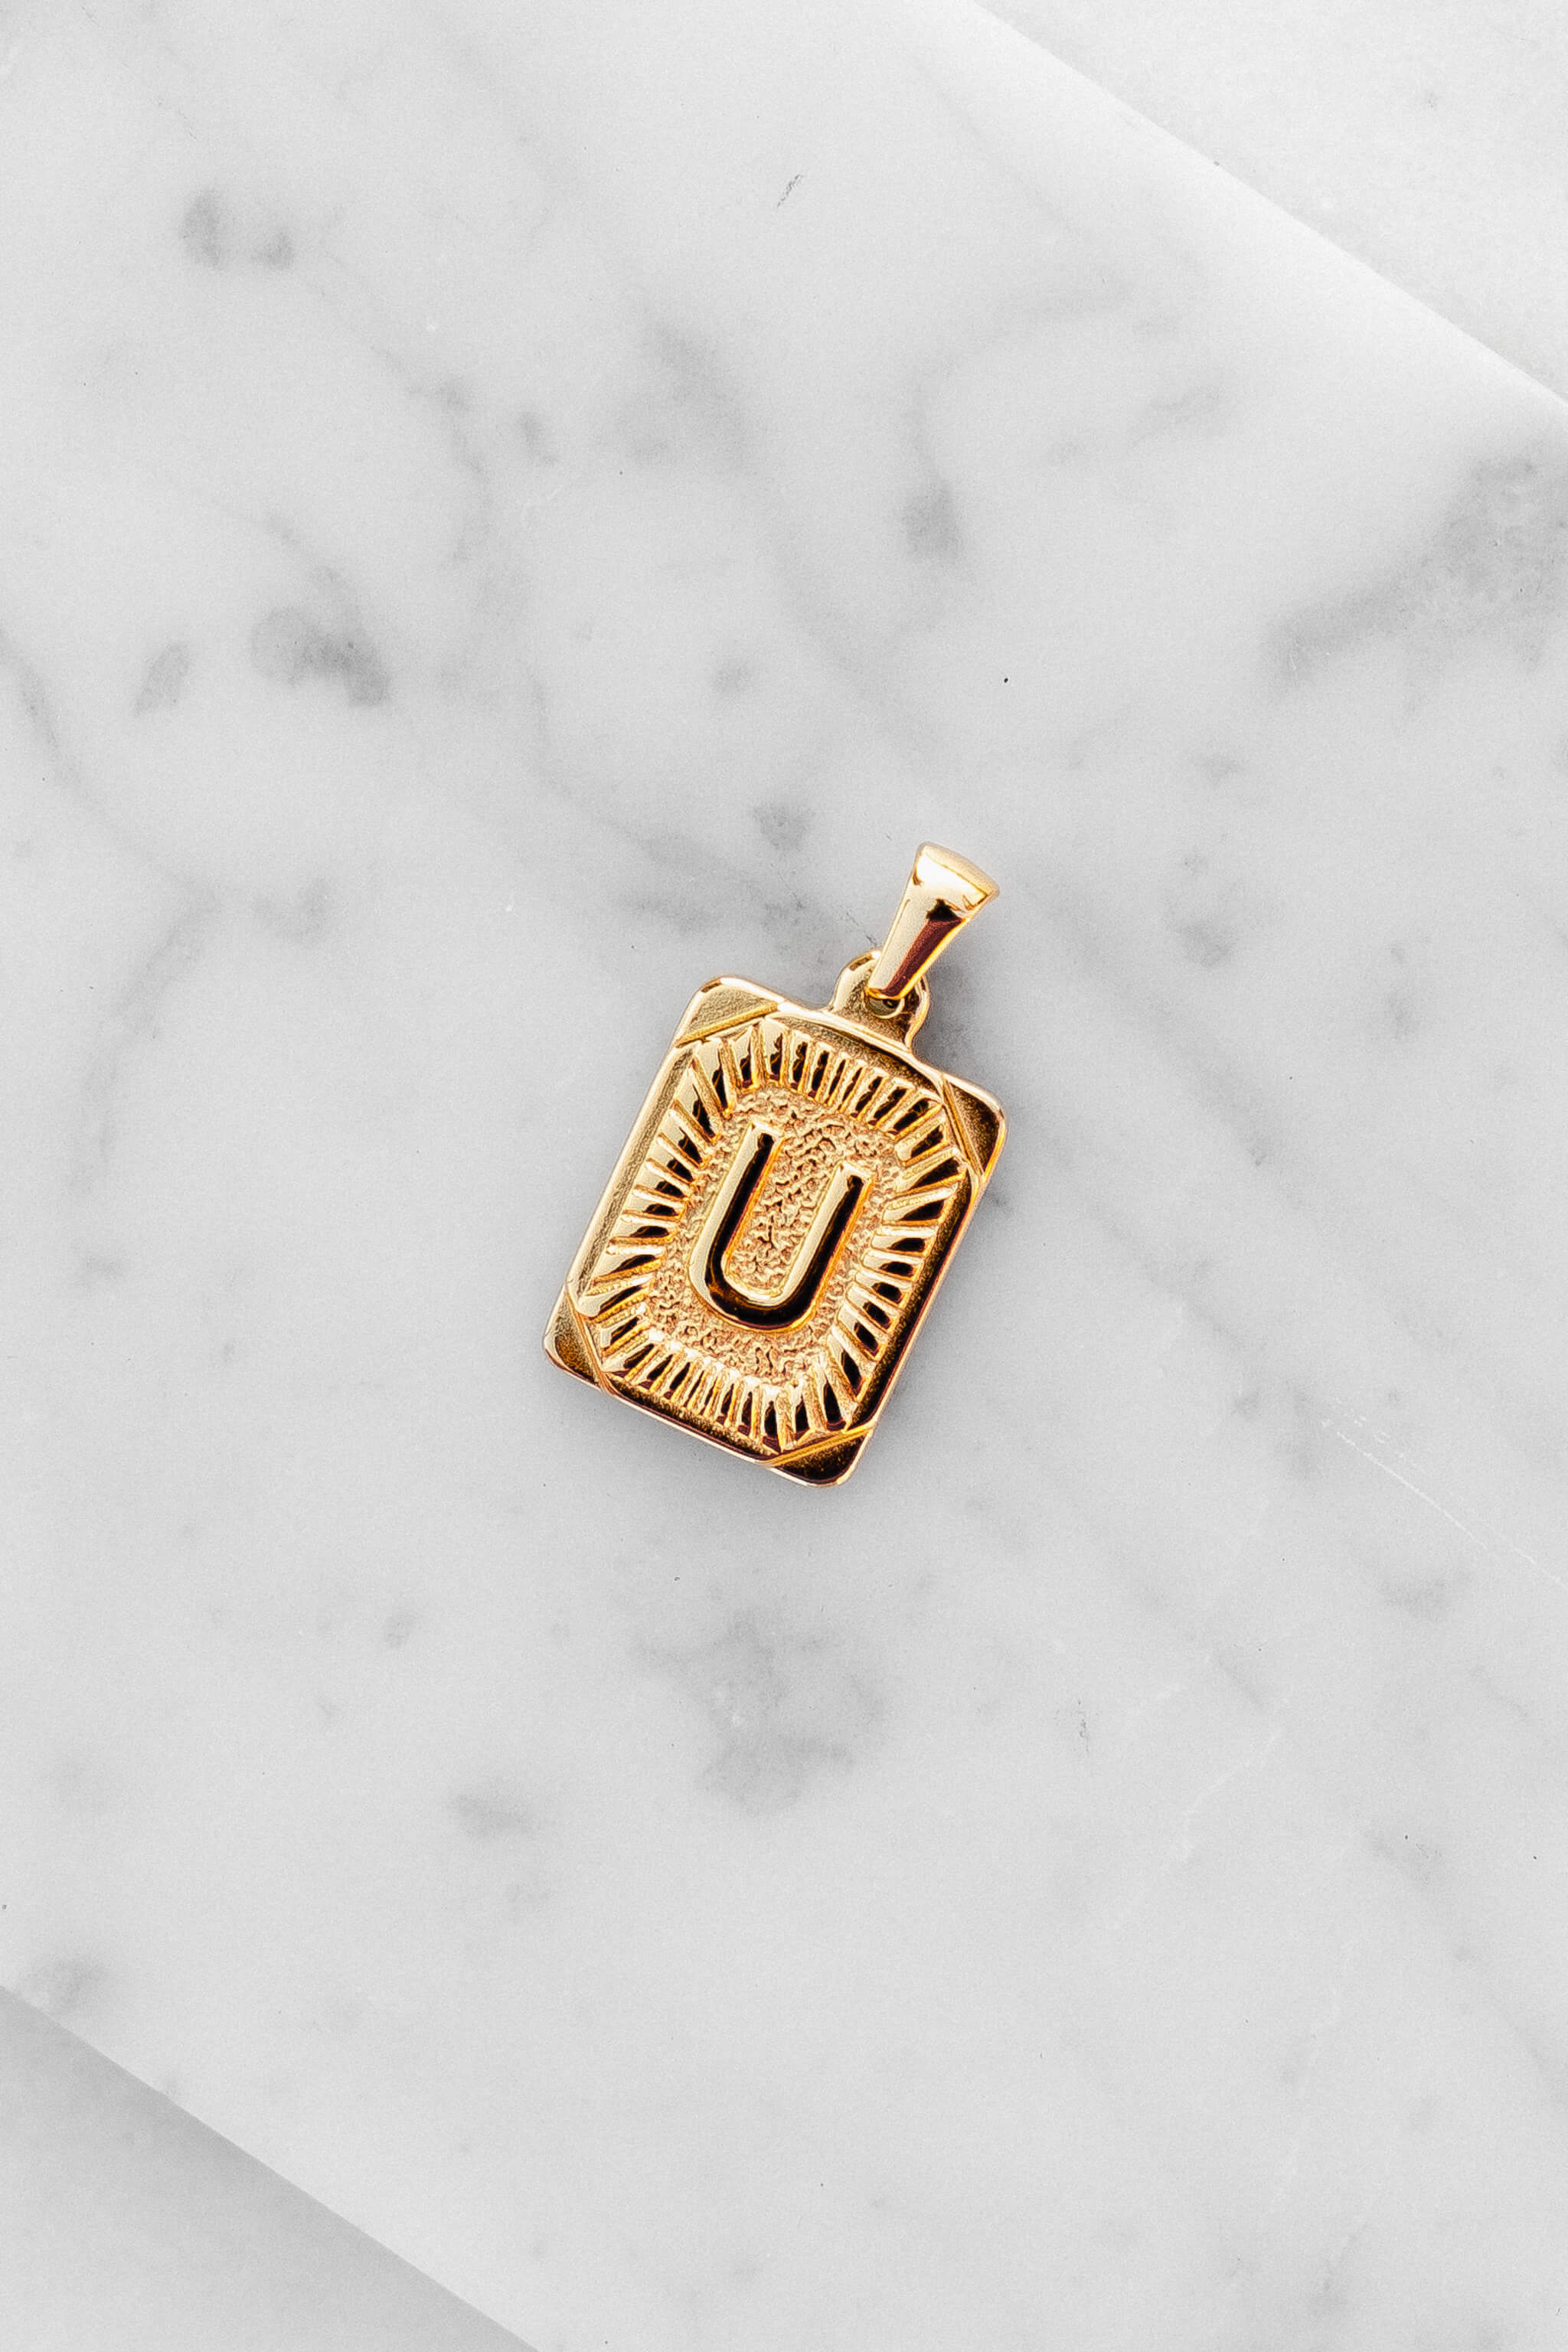 Gold Monogram Letter "U" Charm laying on a marble